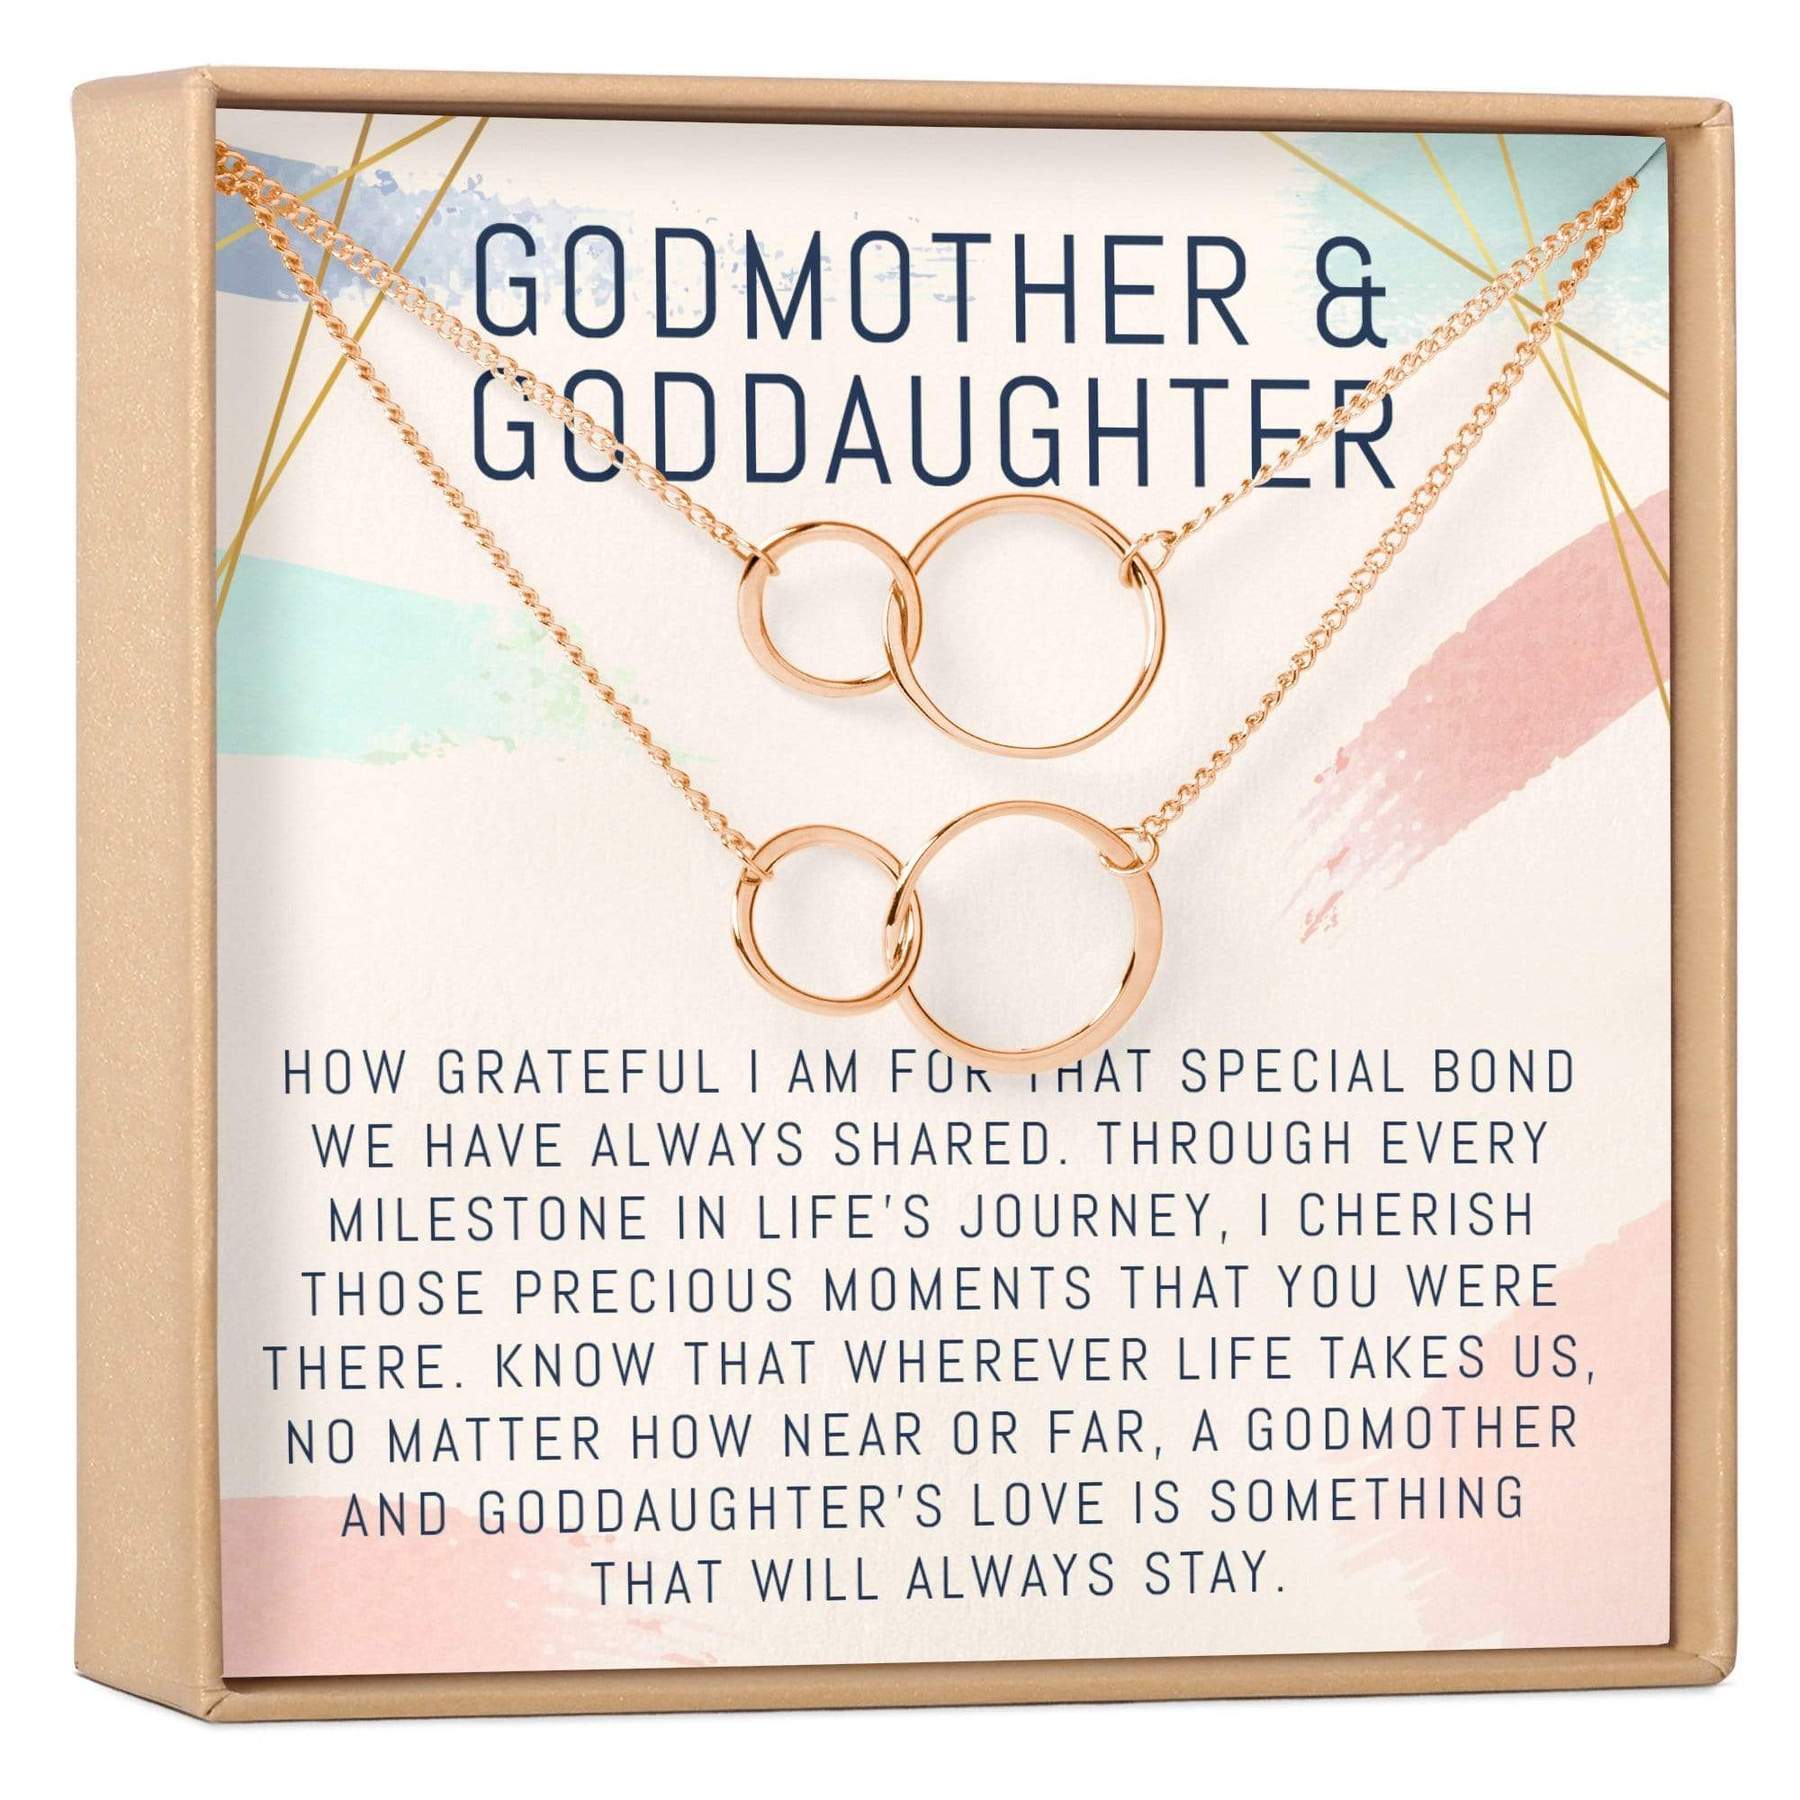 Christmas Gift Godmother-Goddaughter Necklace Multiple Styles Jewelry